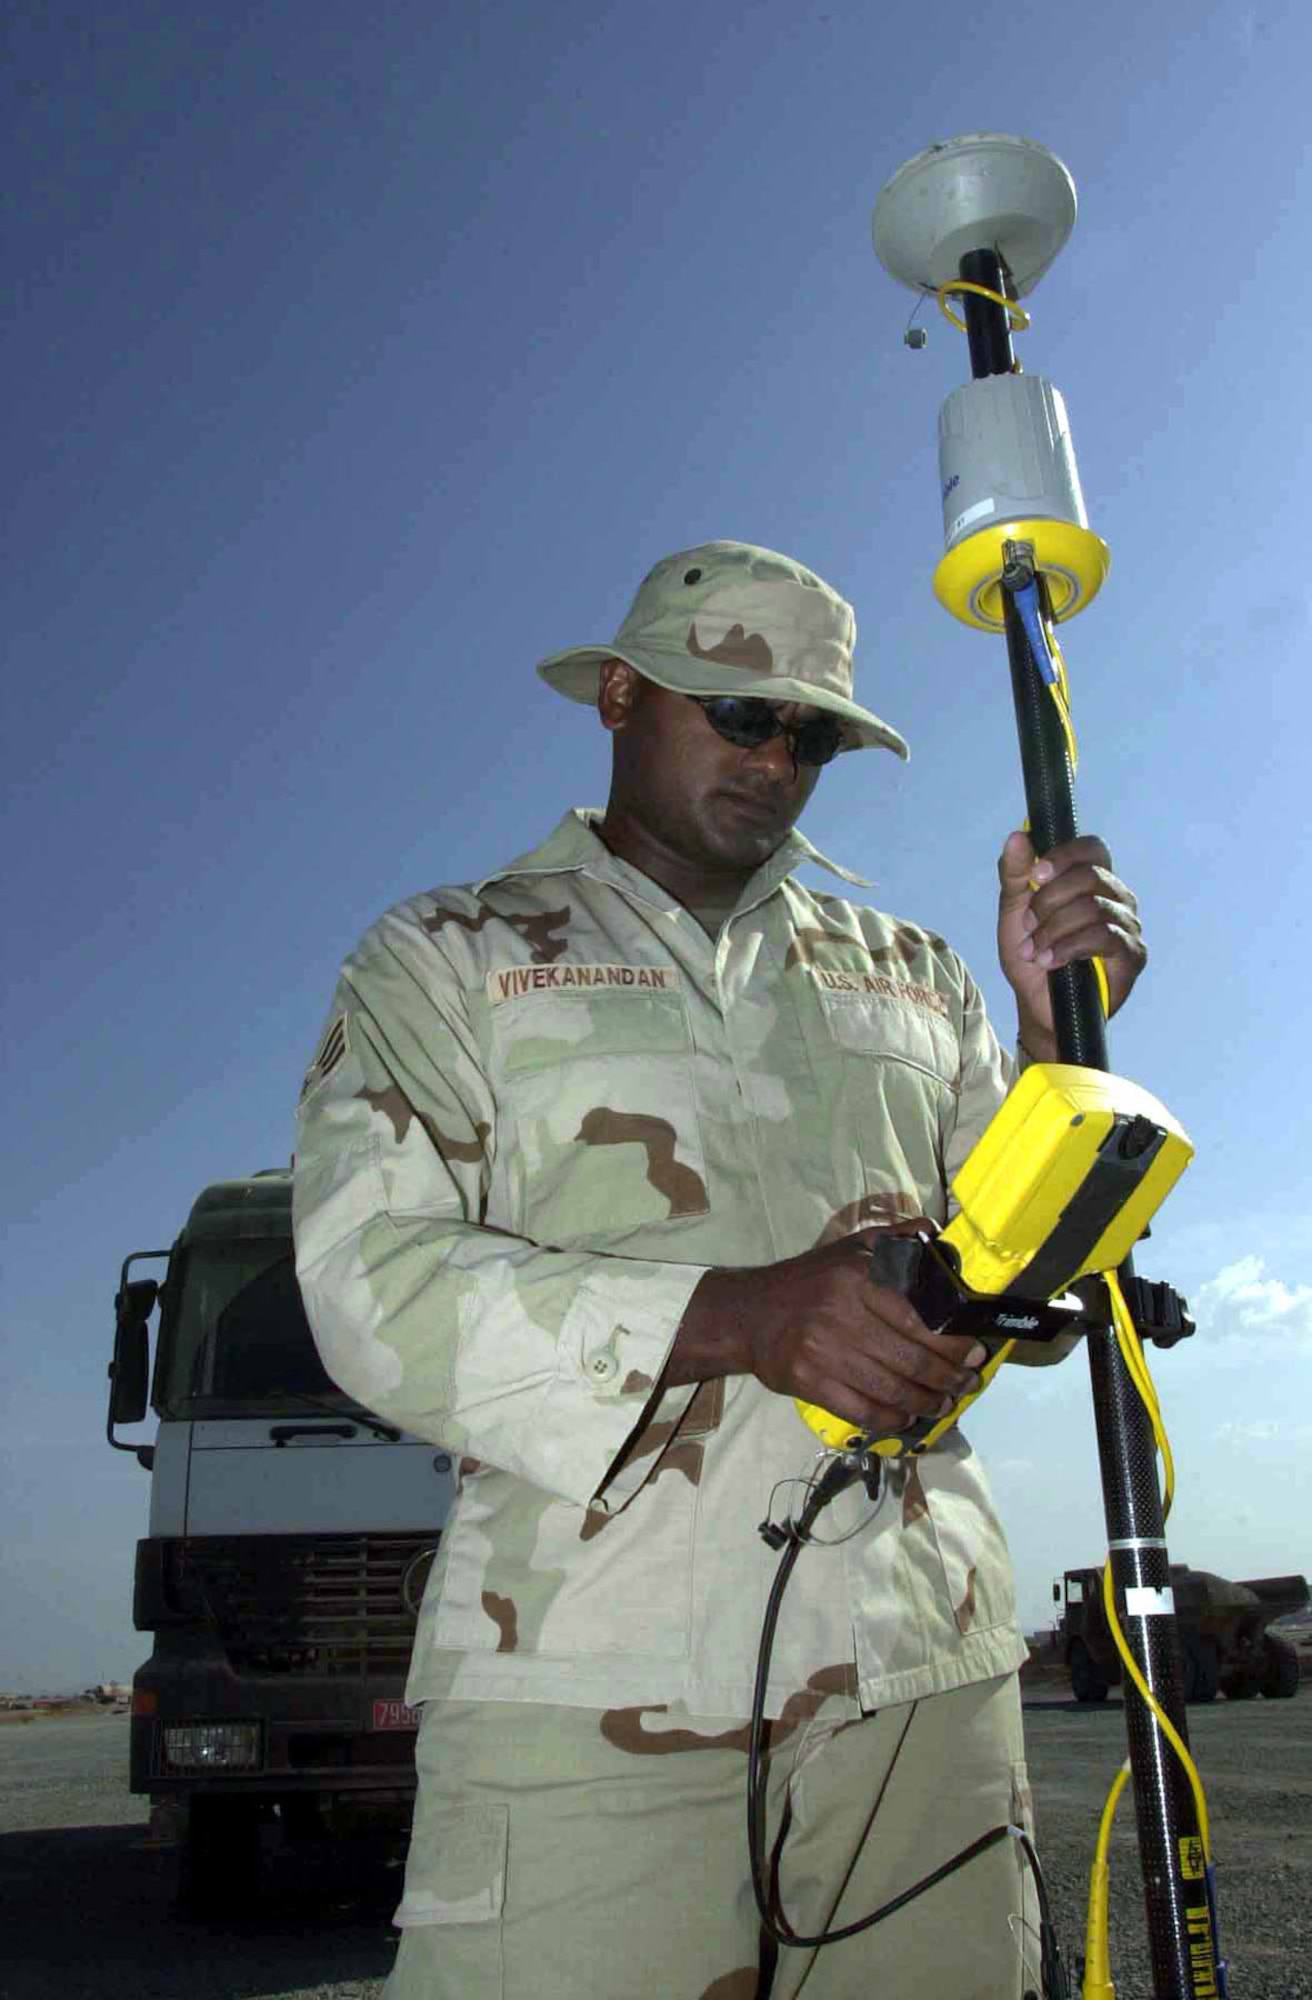 Senior Airman Pratt Vivekanandan, an engineering journeyman with the 819th/219th Expeditionary RED HORSE Squadrons (ERHS), uses a global positioning system (GPS) rover and data collector to check the elevation during a runway construction project in support of Operation Enduring Freedom. (U.S. Air Force photo)